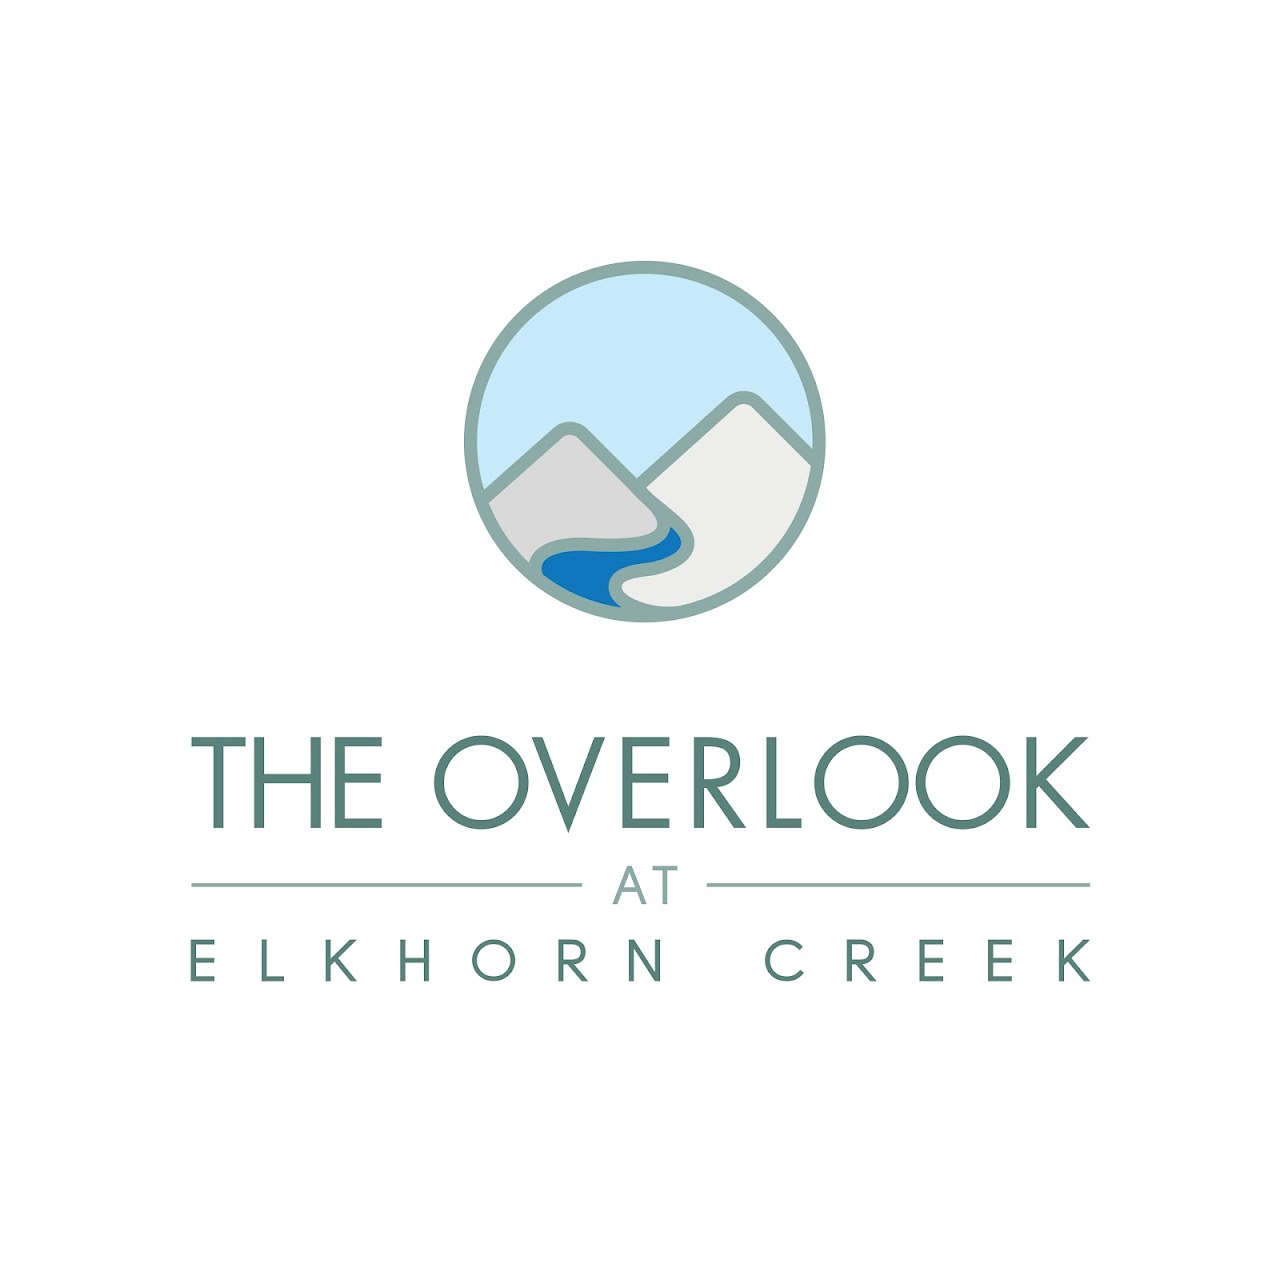 Photo of THE OVERLOOK AT ELKHORN CREEK at OVERVIEW PATH GEORGETOWN, KY 40324